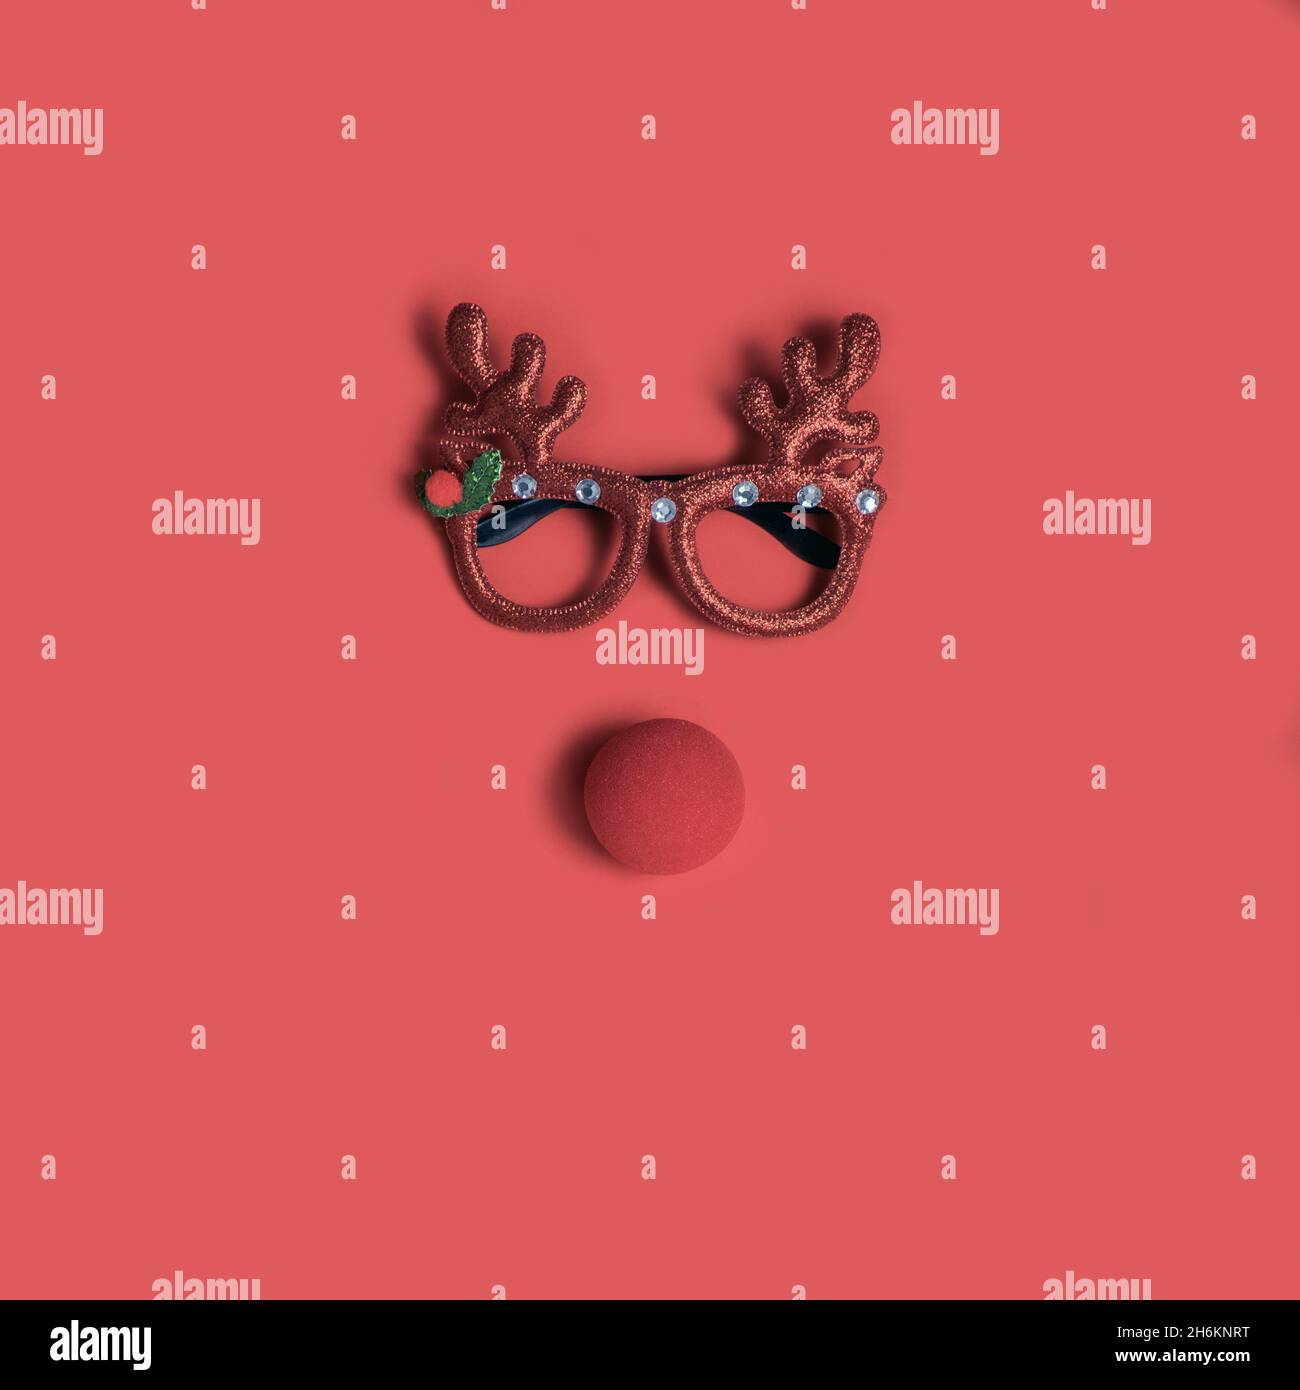 Christmas face with festive glasses and a clown nose on a red background. Flat lay. Stock Photo